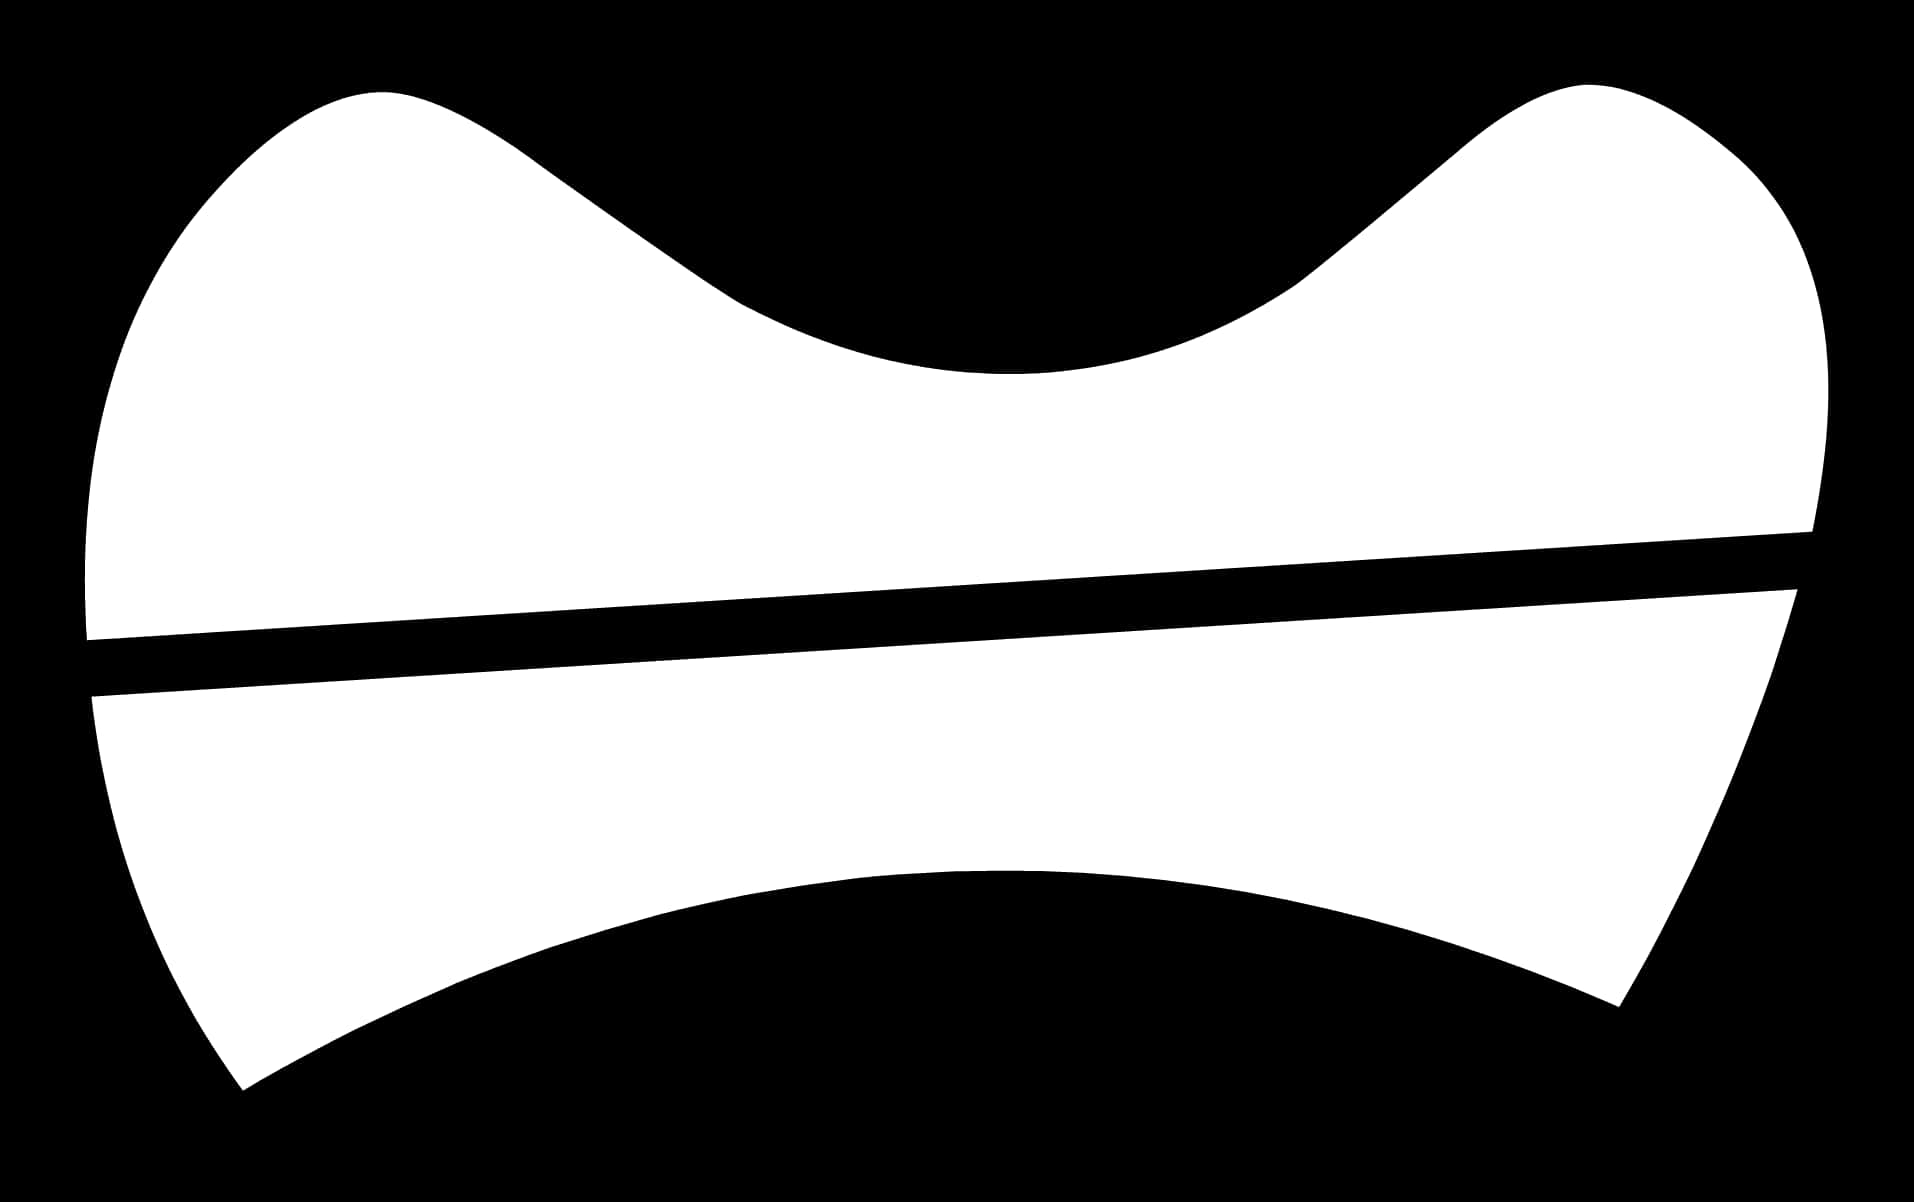 A Black And White Object With A Line